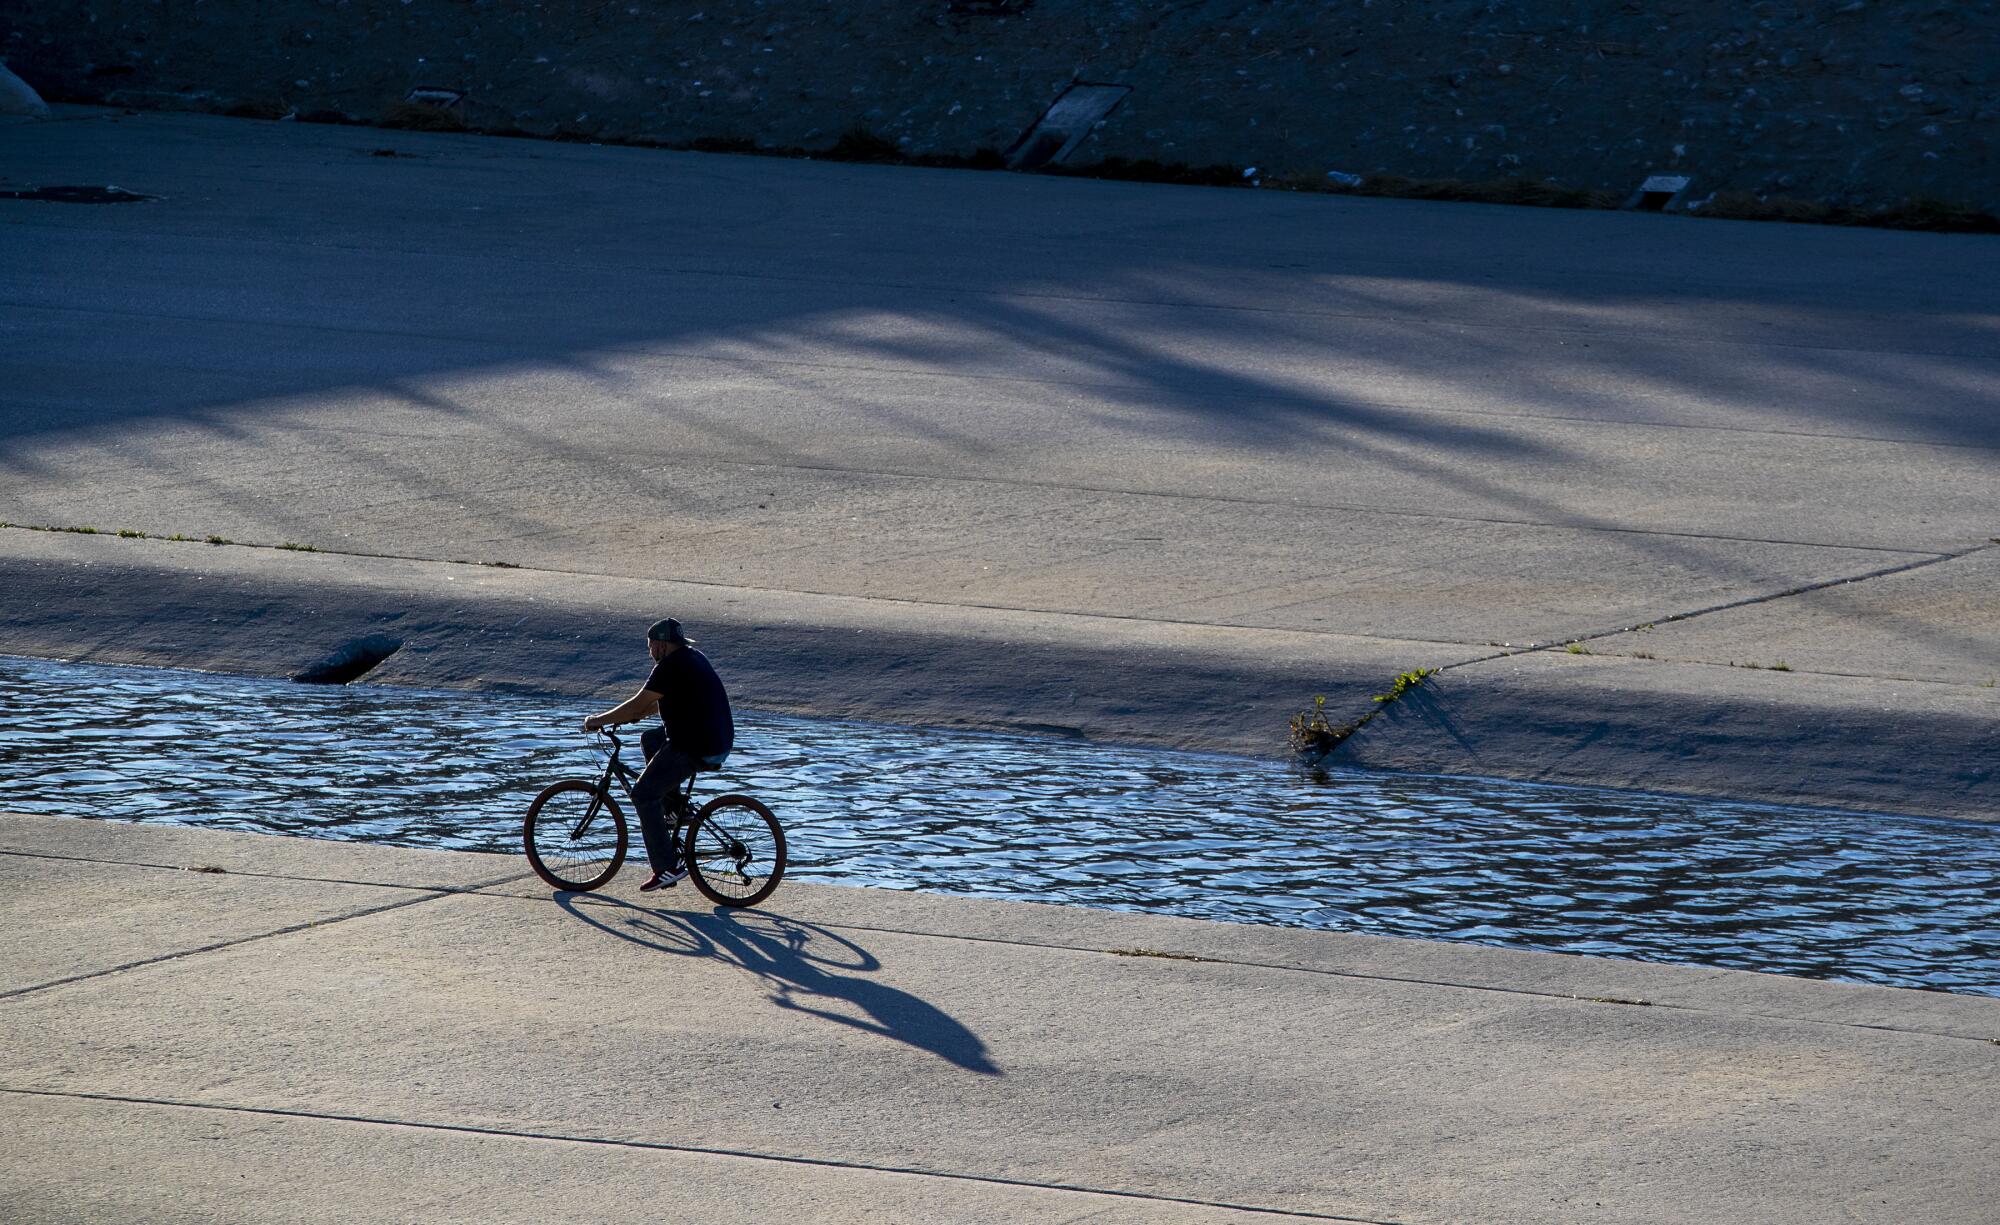  A cyclist rides in the Los Angeles River Sunday, Jan. 10, 2021 in South Gate.